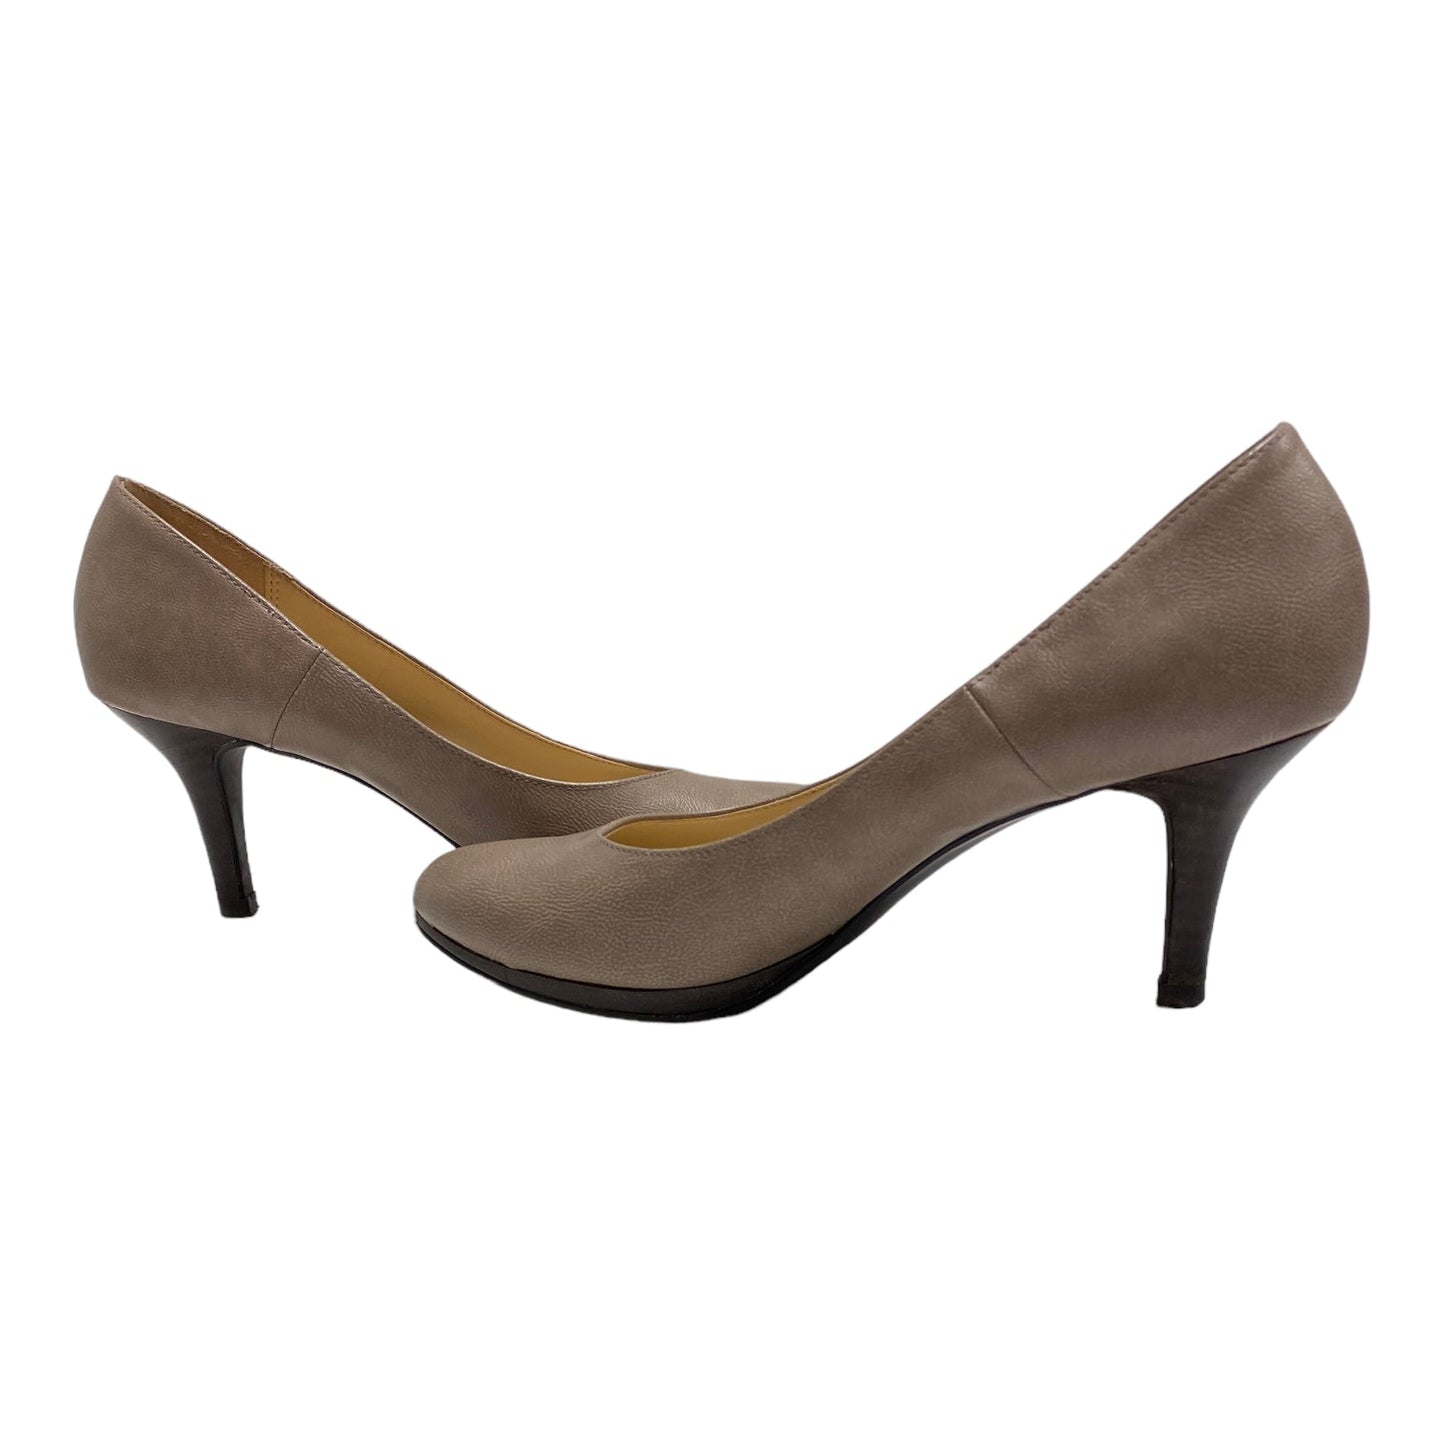 Shoes Heels Stiletto By Kelly And Katie  Size: 6.5